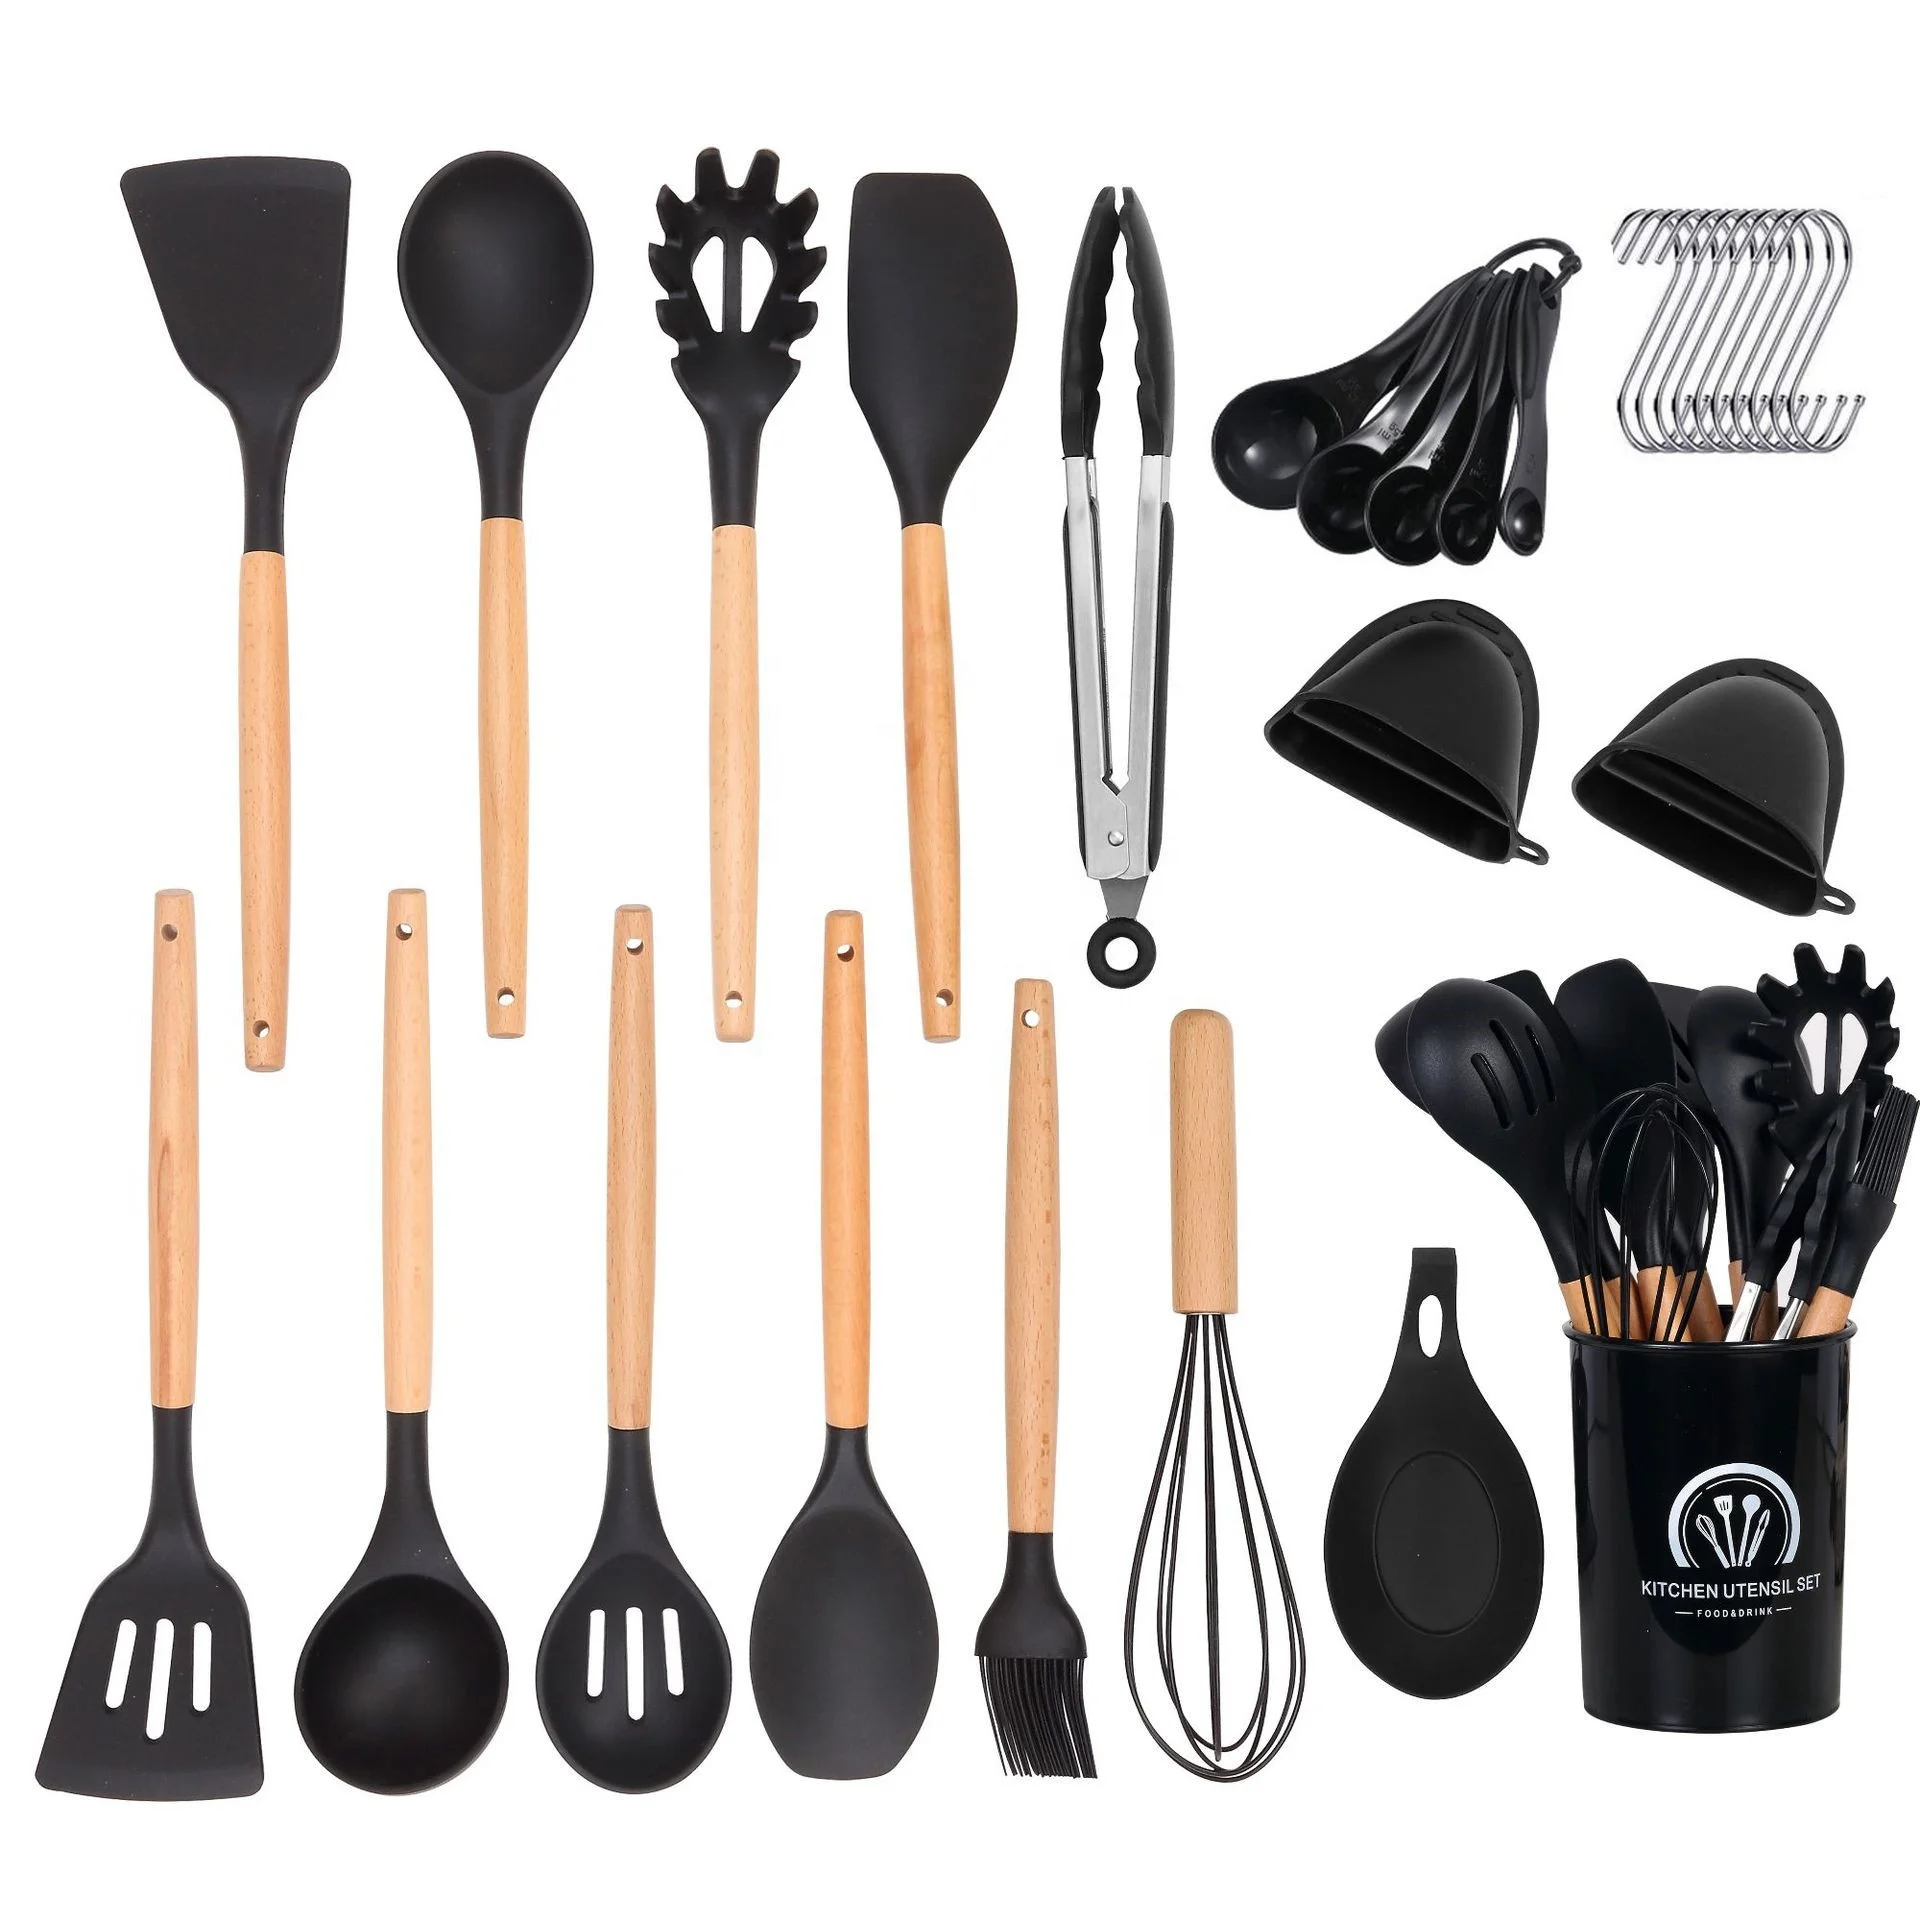 Silicone Kitchenware 38pcs Utensils Set With Holder Non Stick Wooden Handle Silicone Kitchen Accessories Cooking Utensil